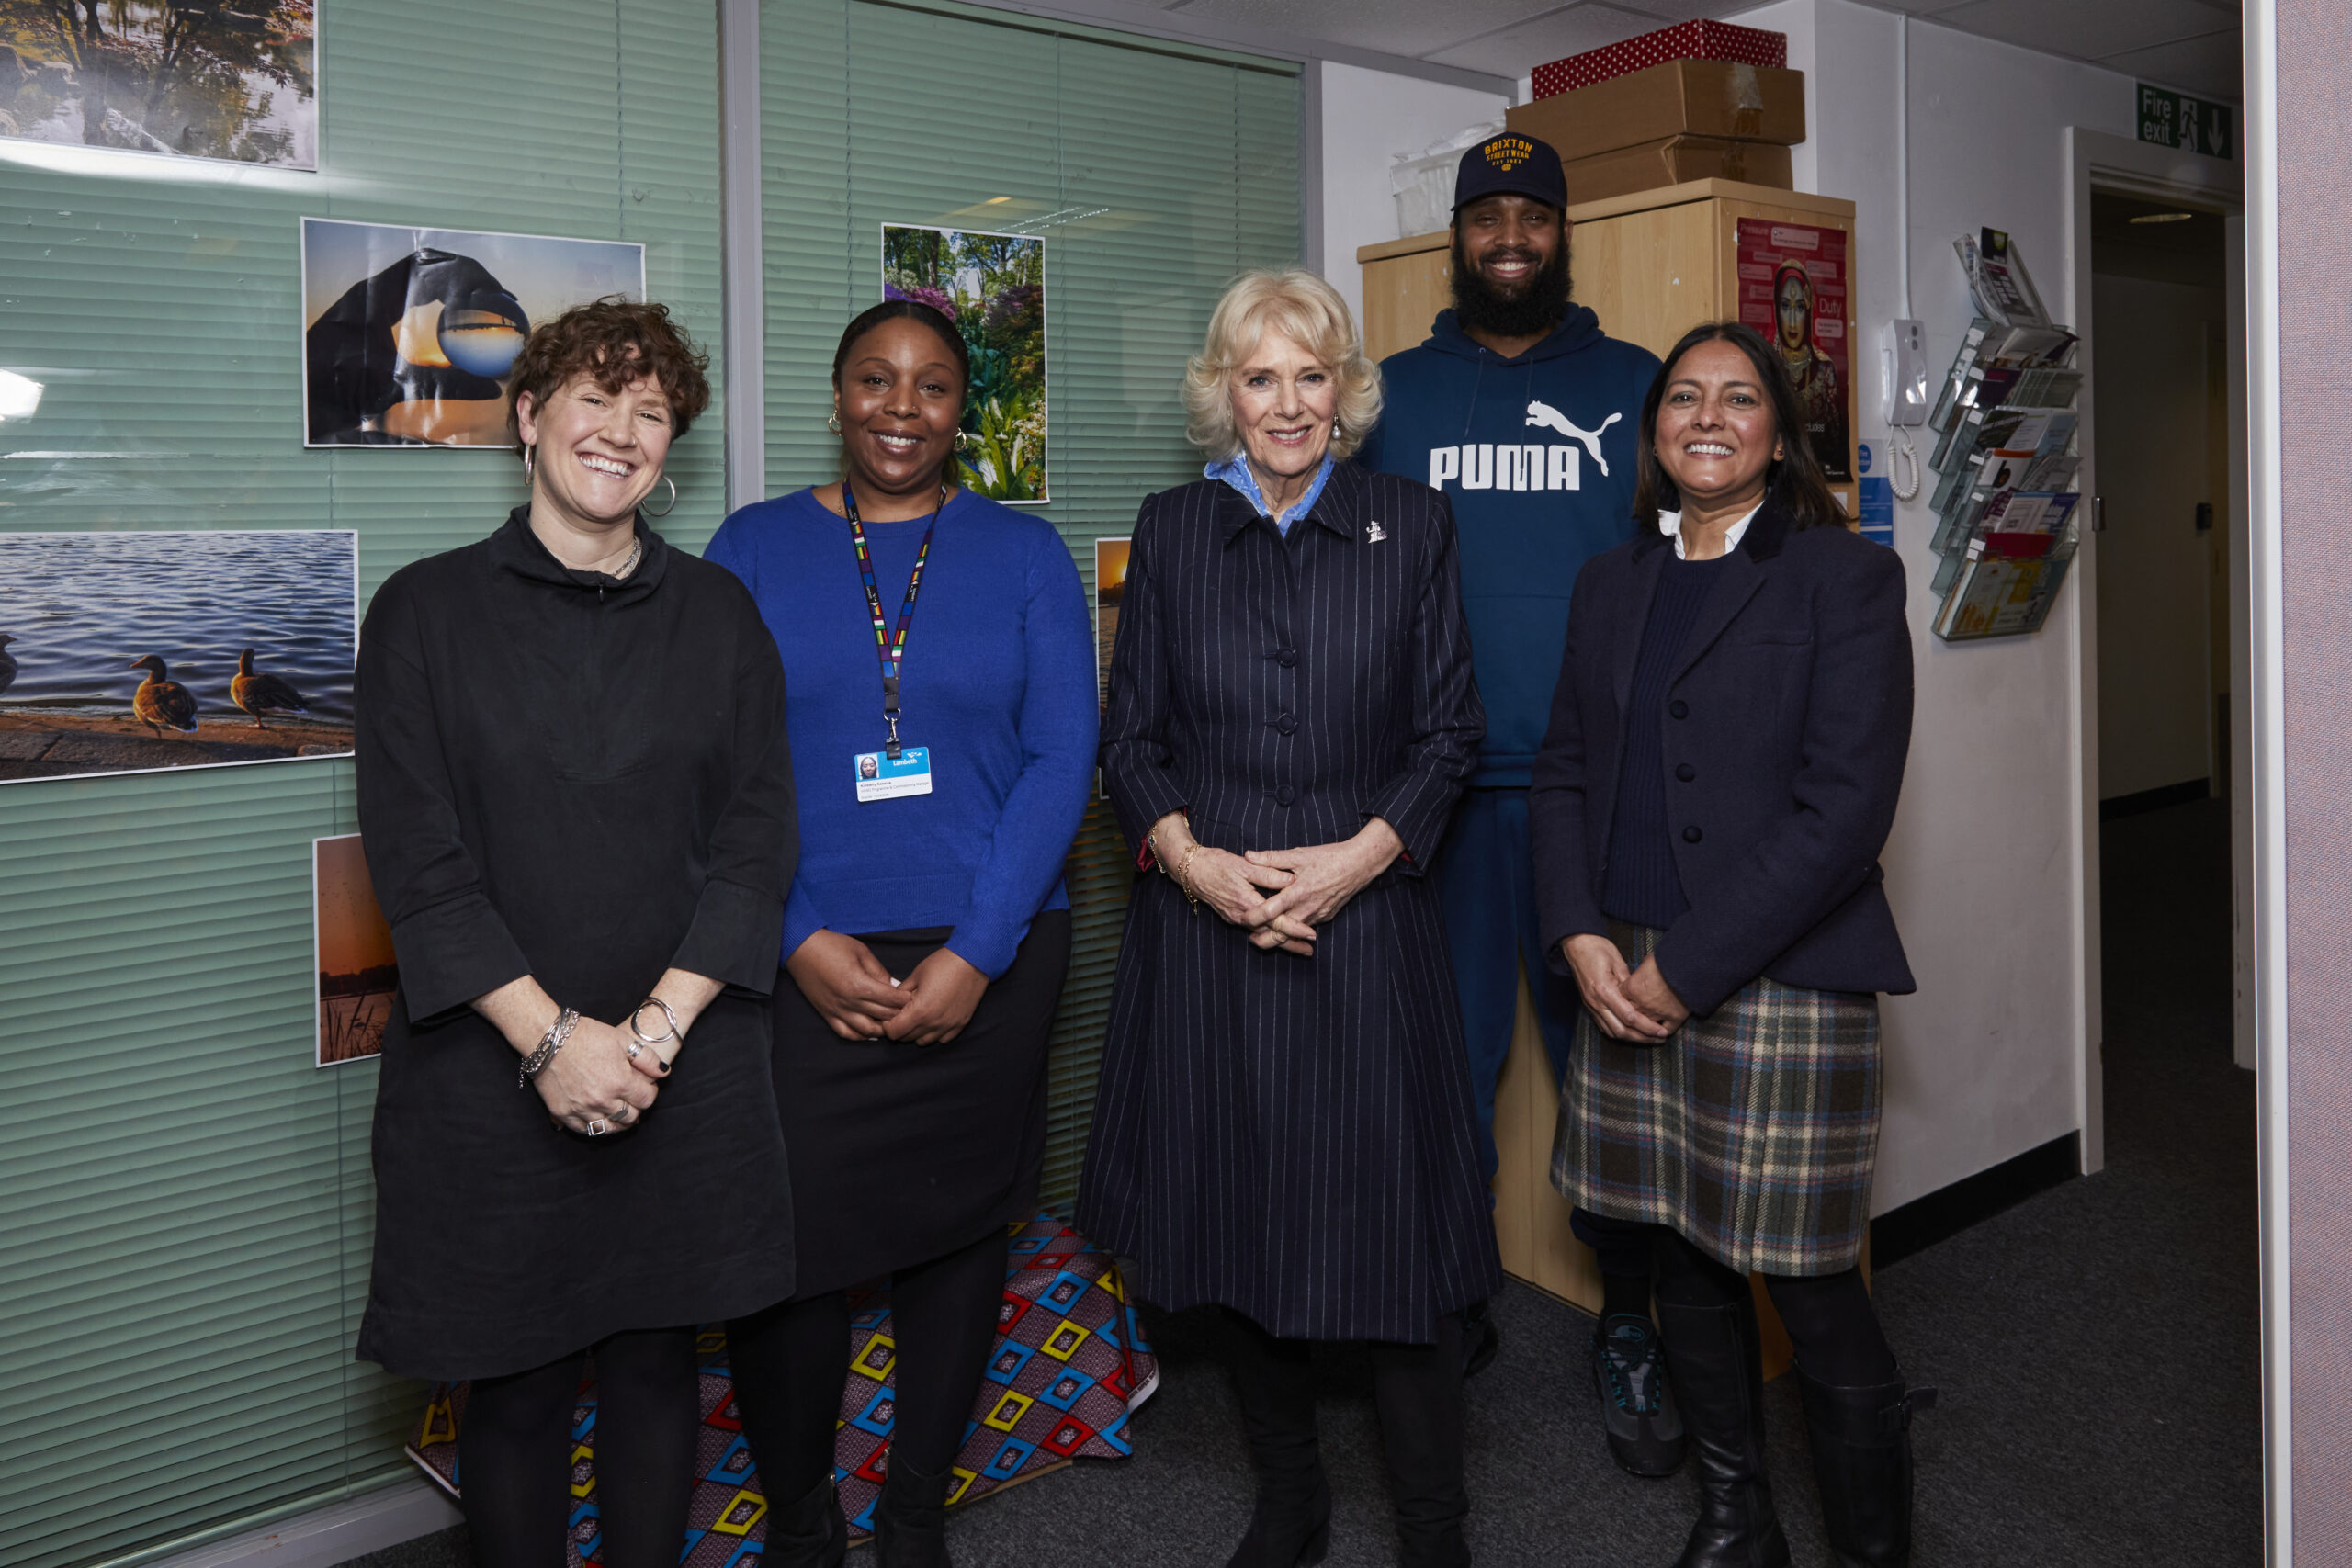 Lambeth: Her Majesty The Queen visits Refuge’s Gaia Centre in Lambeth